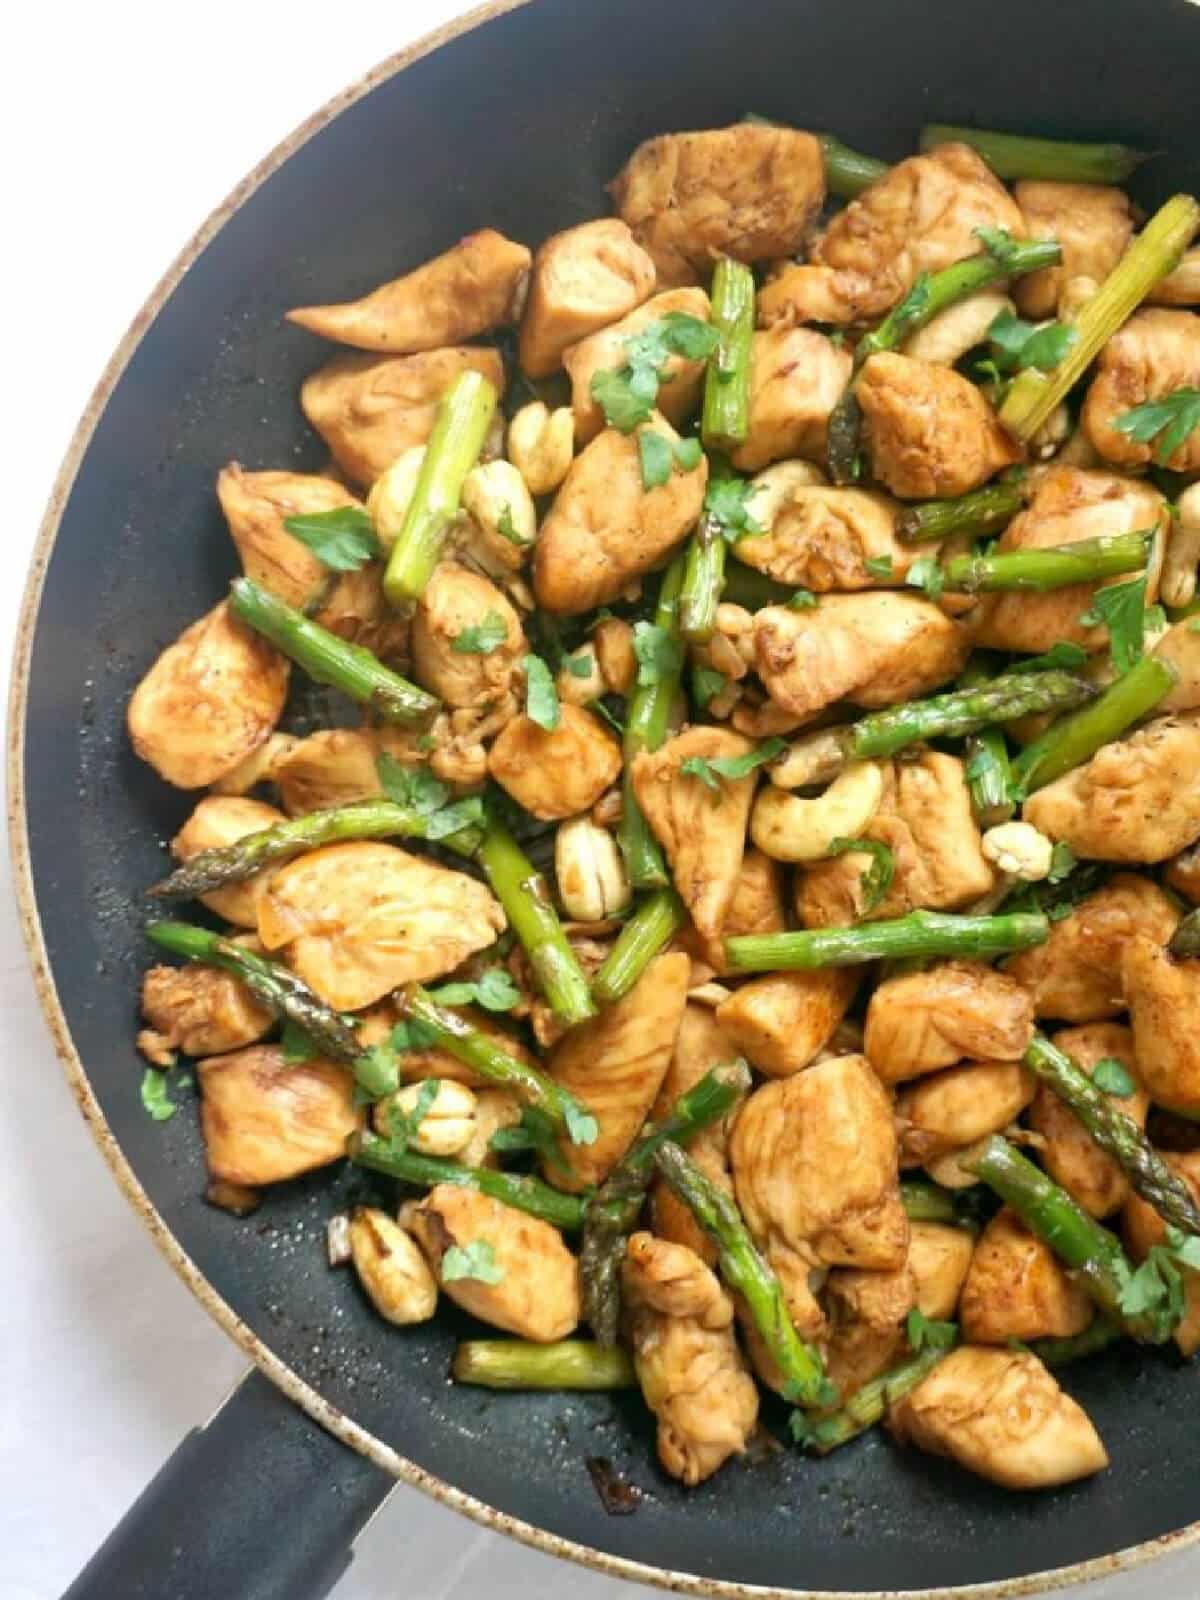 A pan with chicken pieces and asparagus.